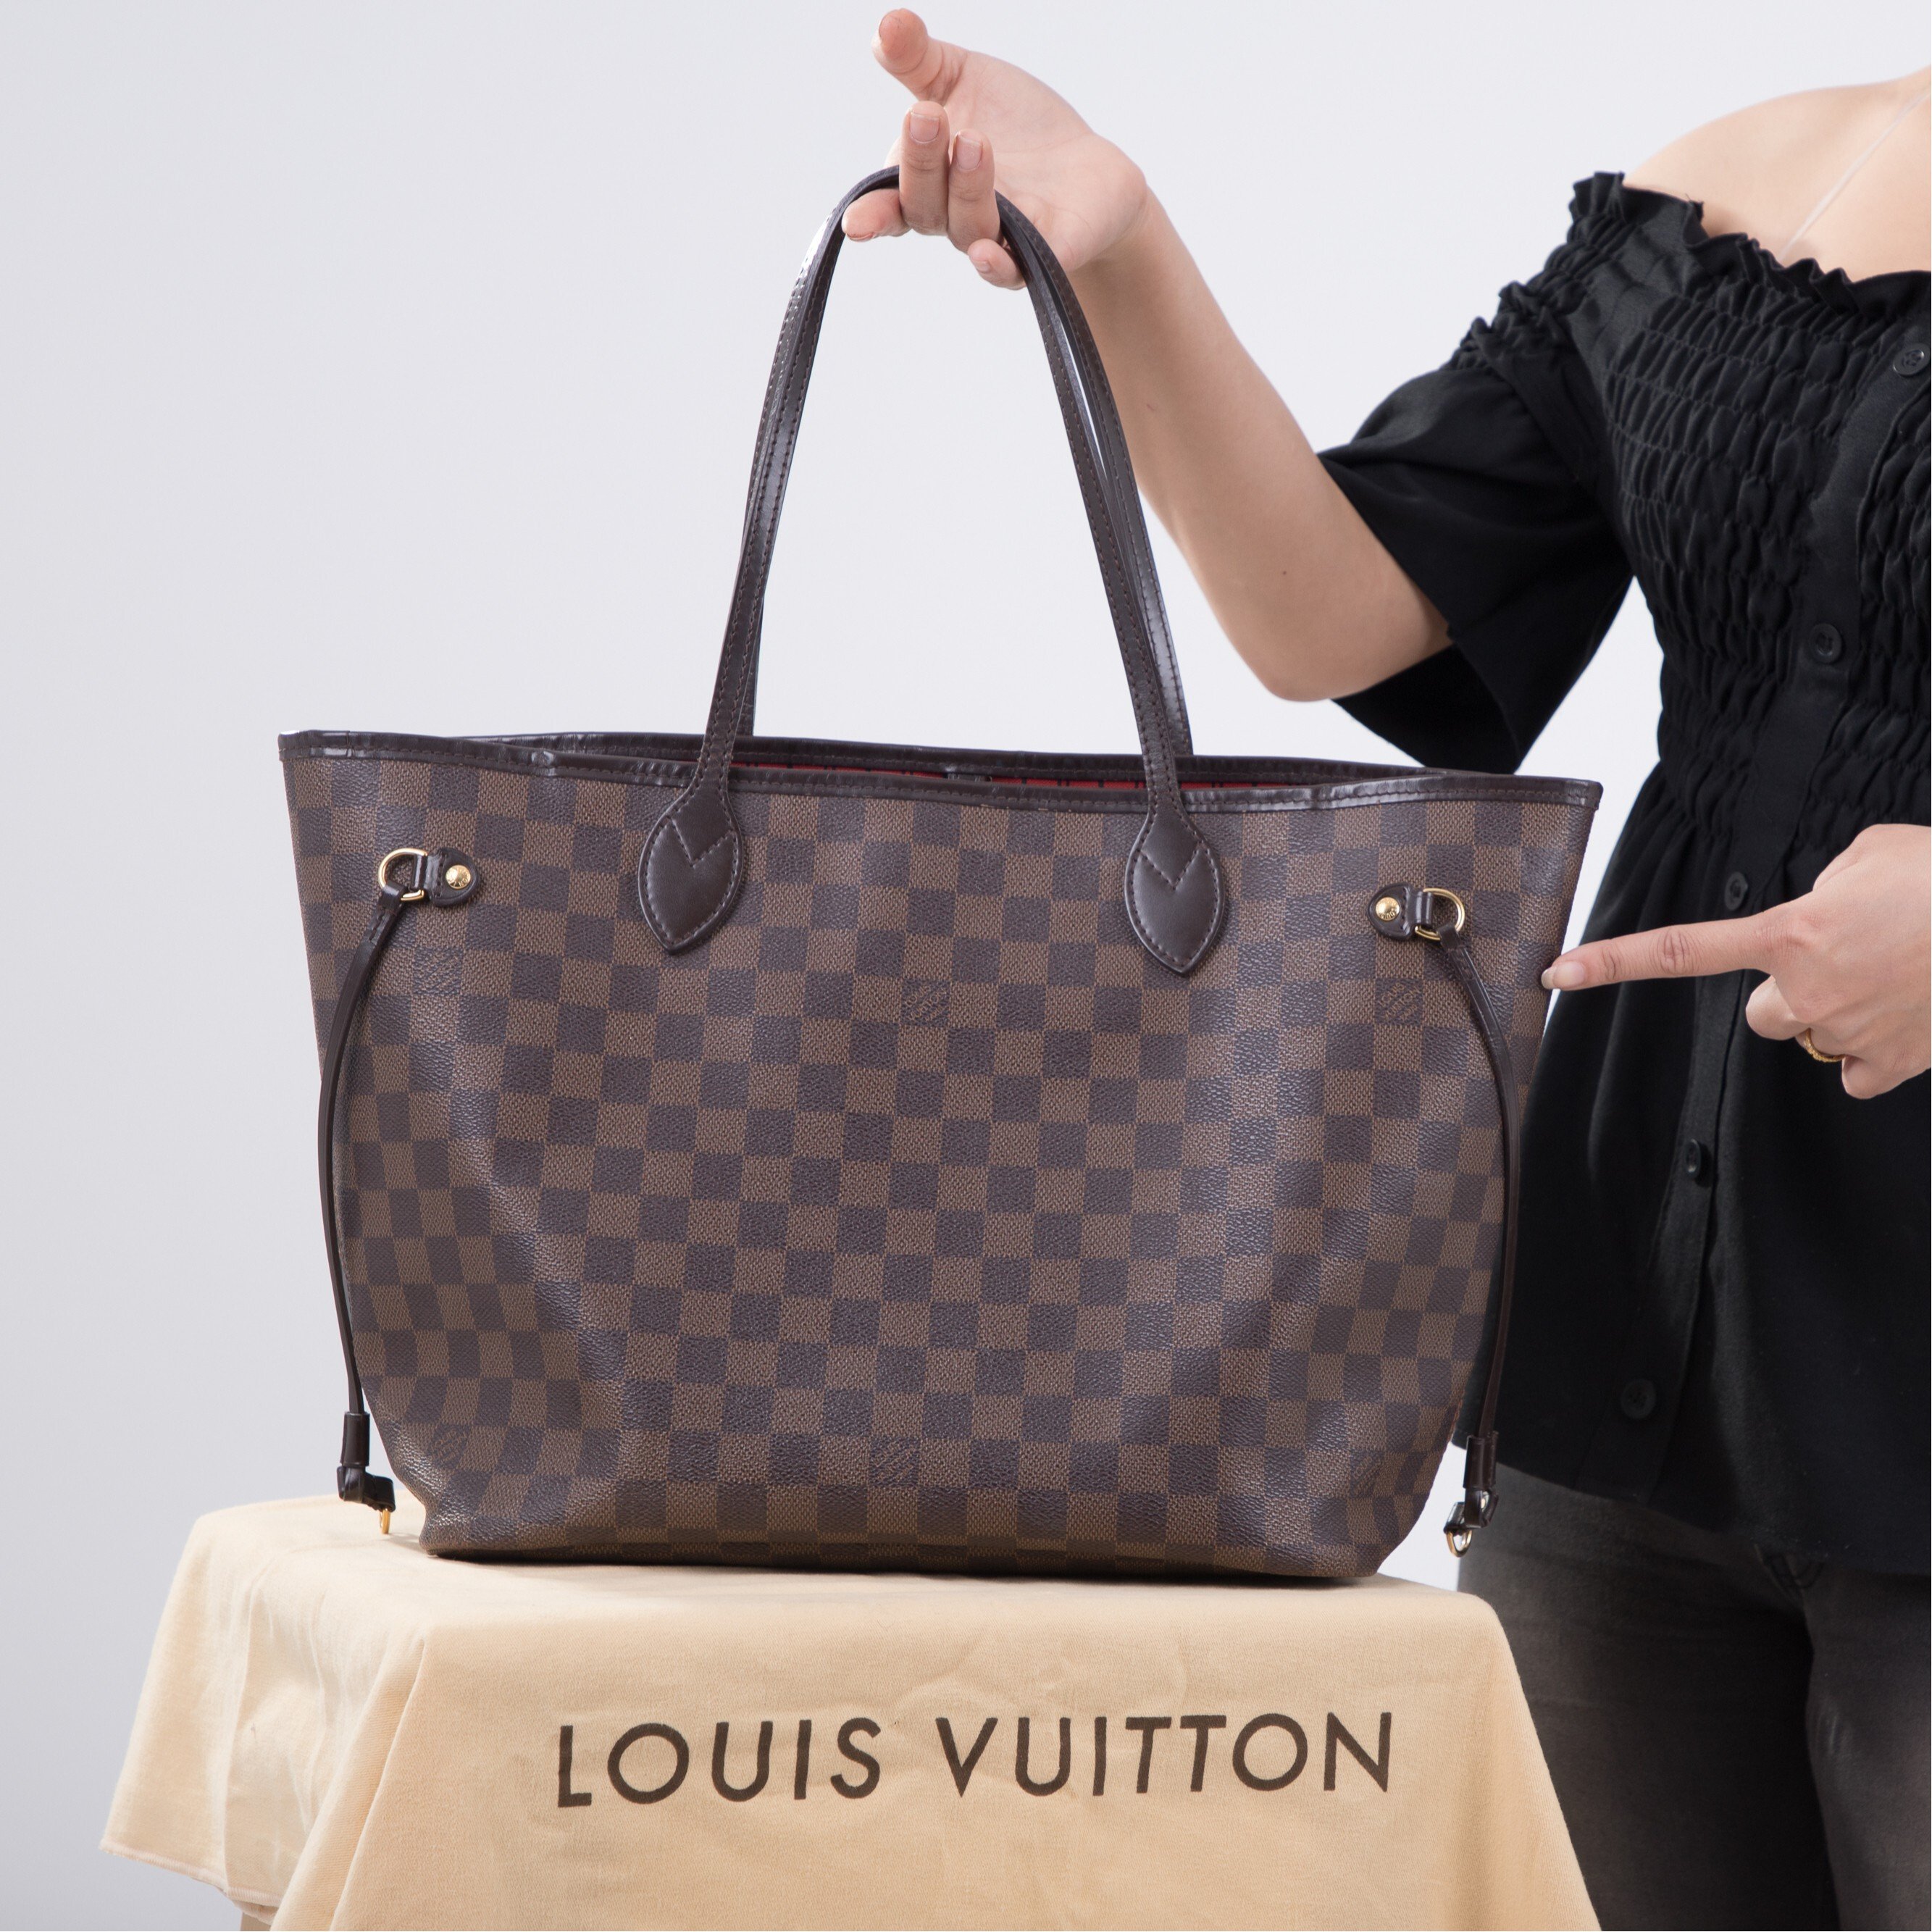 First Chanel, now Louis Vuitton – will prices of more luxury brands go up  after losses during coronavirus lockdowns?